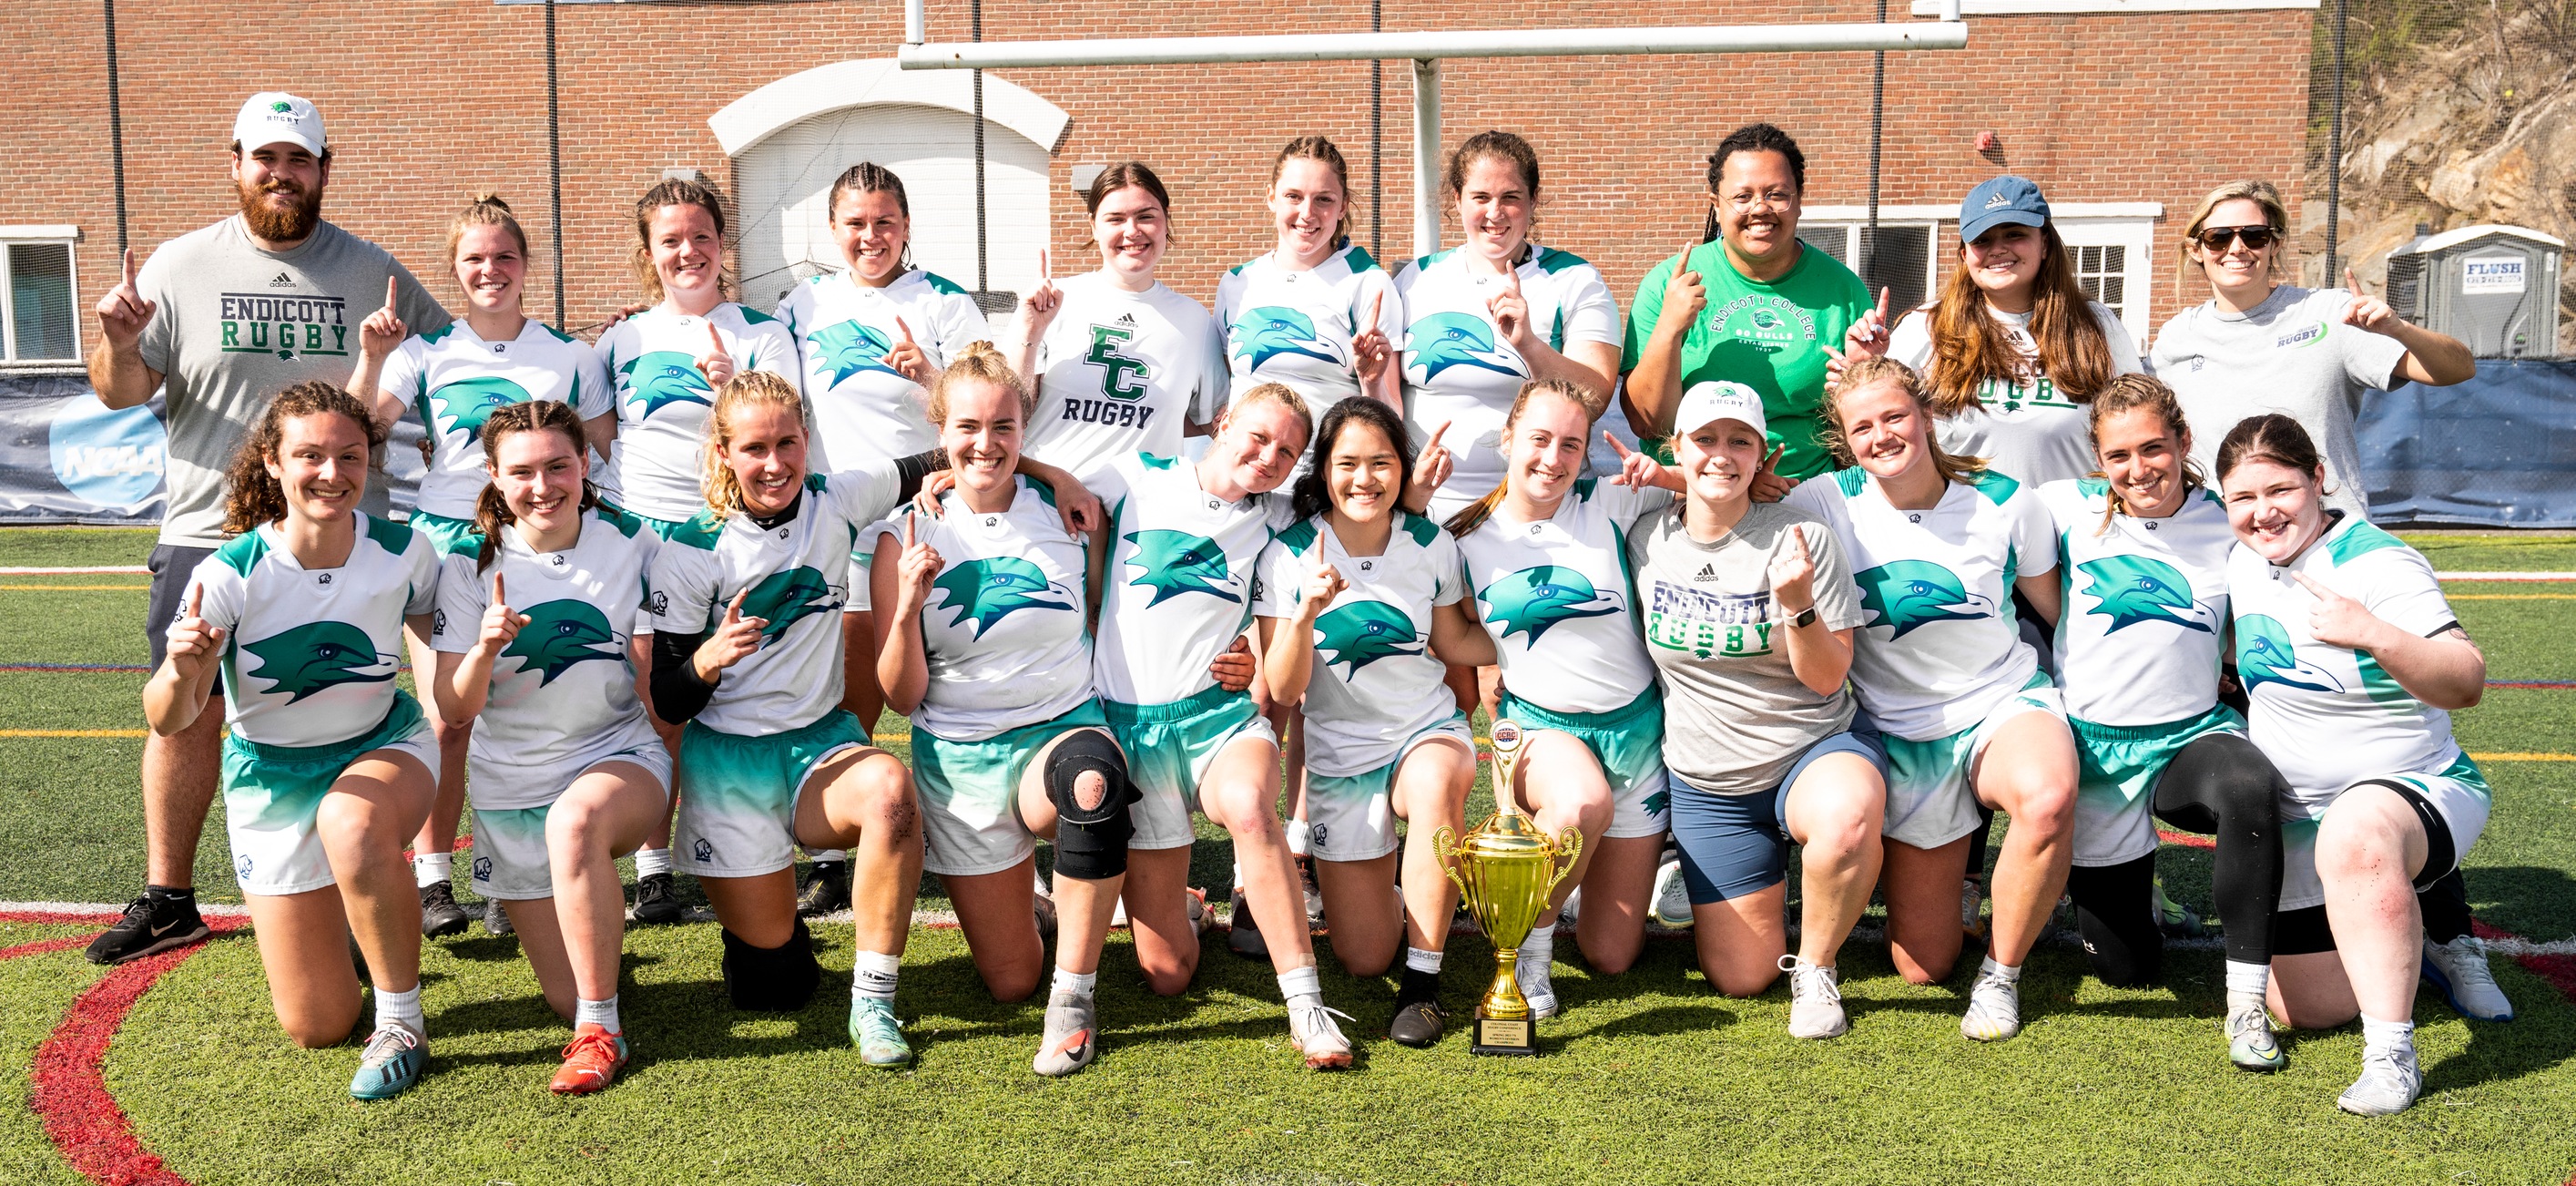 No. 1 Women’s Rugby Captures CCRC 7s Championship